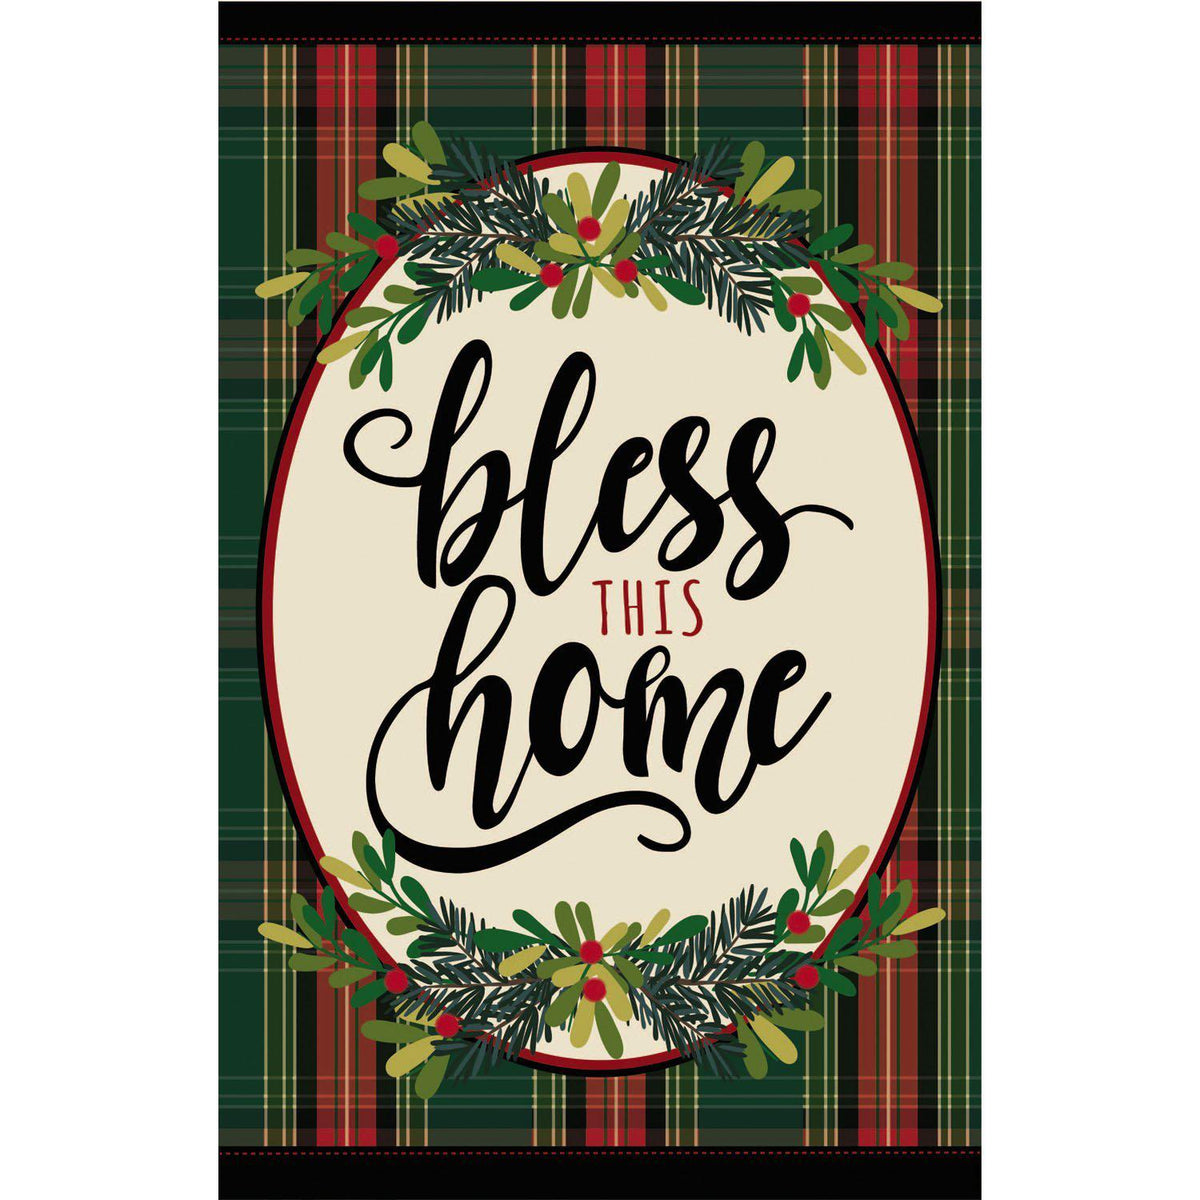 The Bless This Home Plaid house banner features a green and red plaid background and the words "Bless This Home" surrounded by greens and berries.